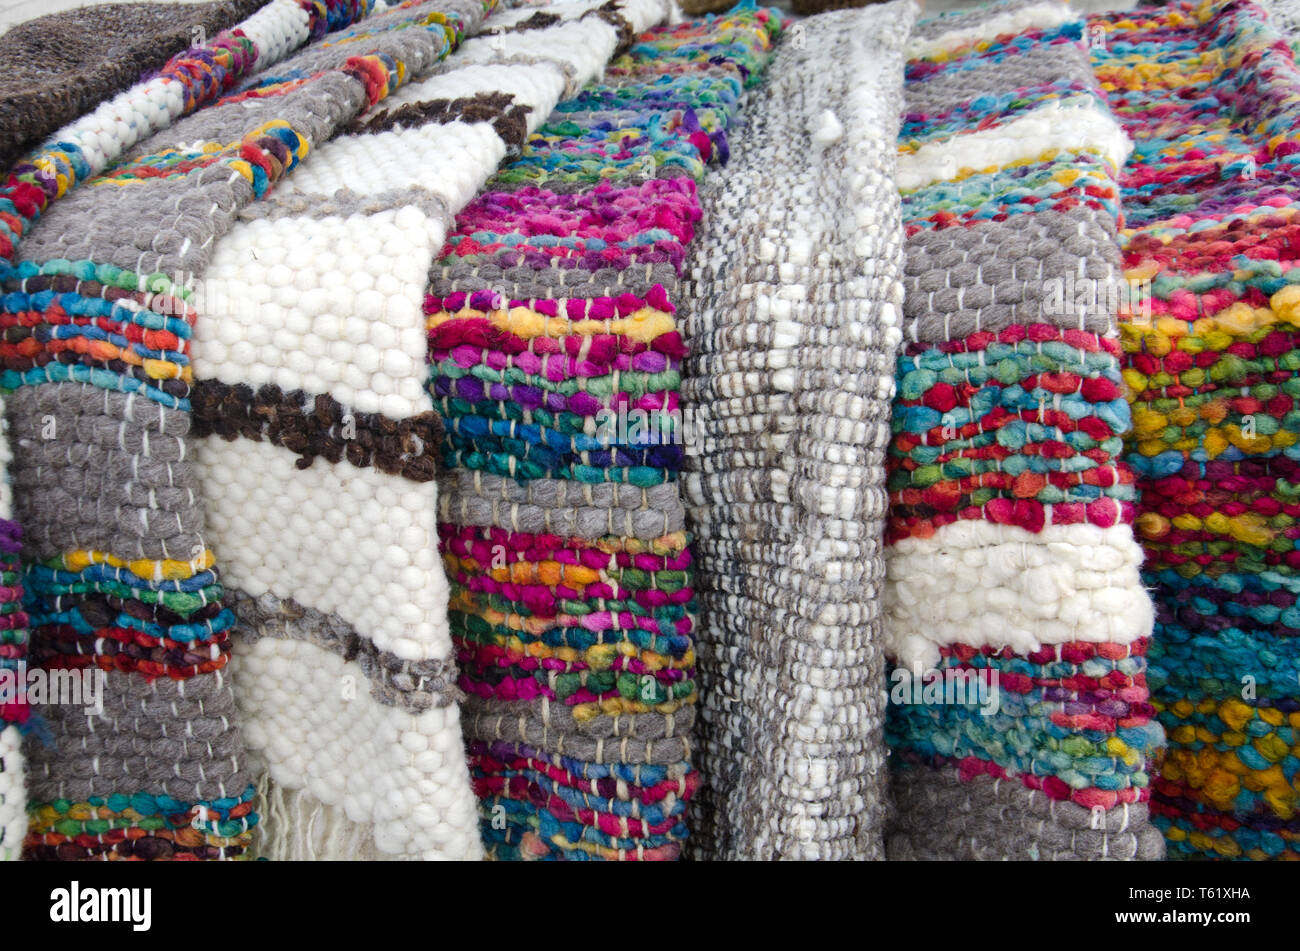 colourful rugs are among the wide range of thick knit clothes and goods on sale in the Delcahue artisan market on Chile's Chiloé island Stock Photo